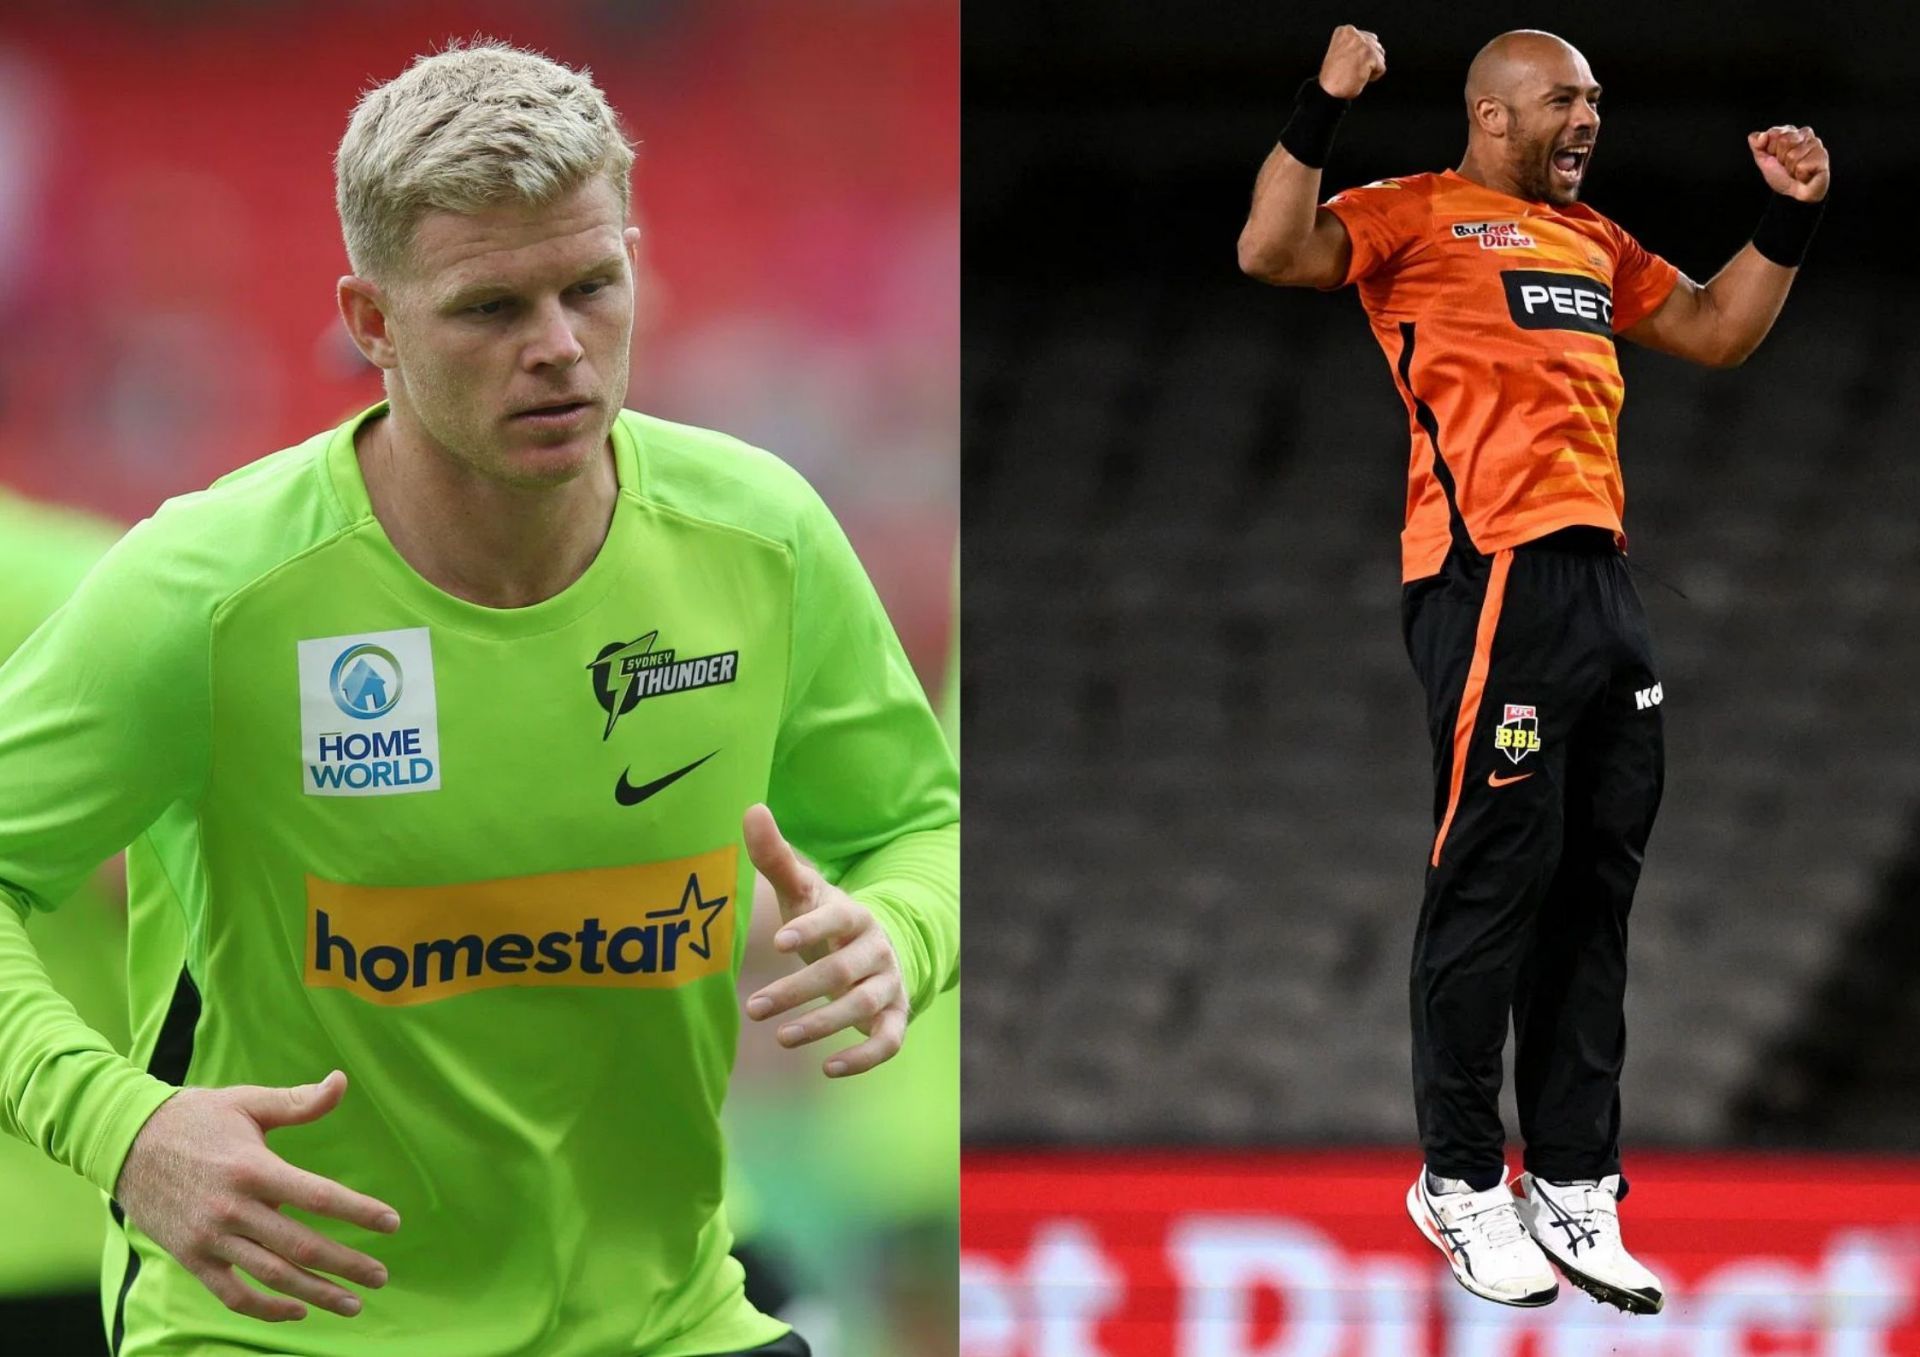 Sam Billings and Tymal Mills are among 6 England players who have been recalled by the ECB ahead of the Carribean tour.